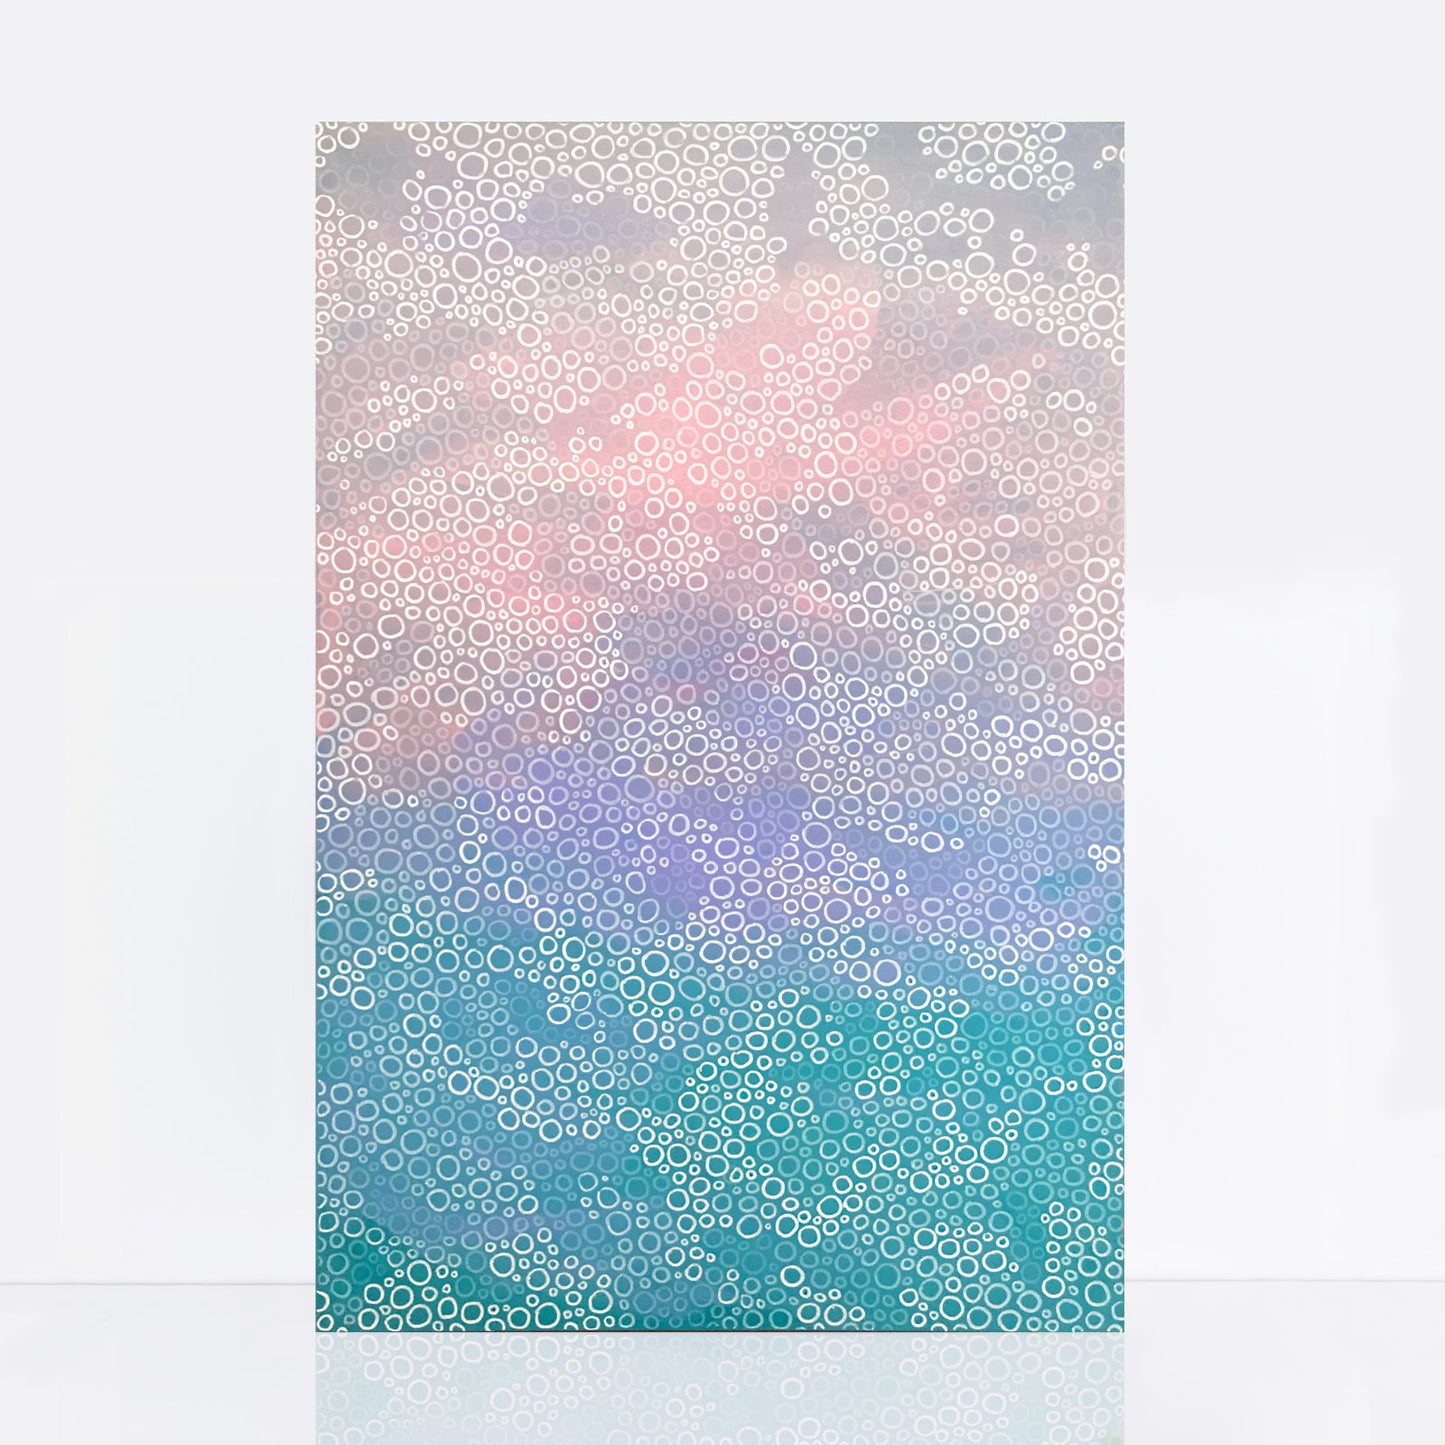 pastel pinks, purples and turquoise abstract painting with circles pointillism